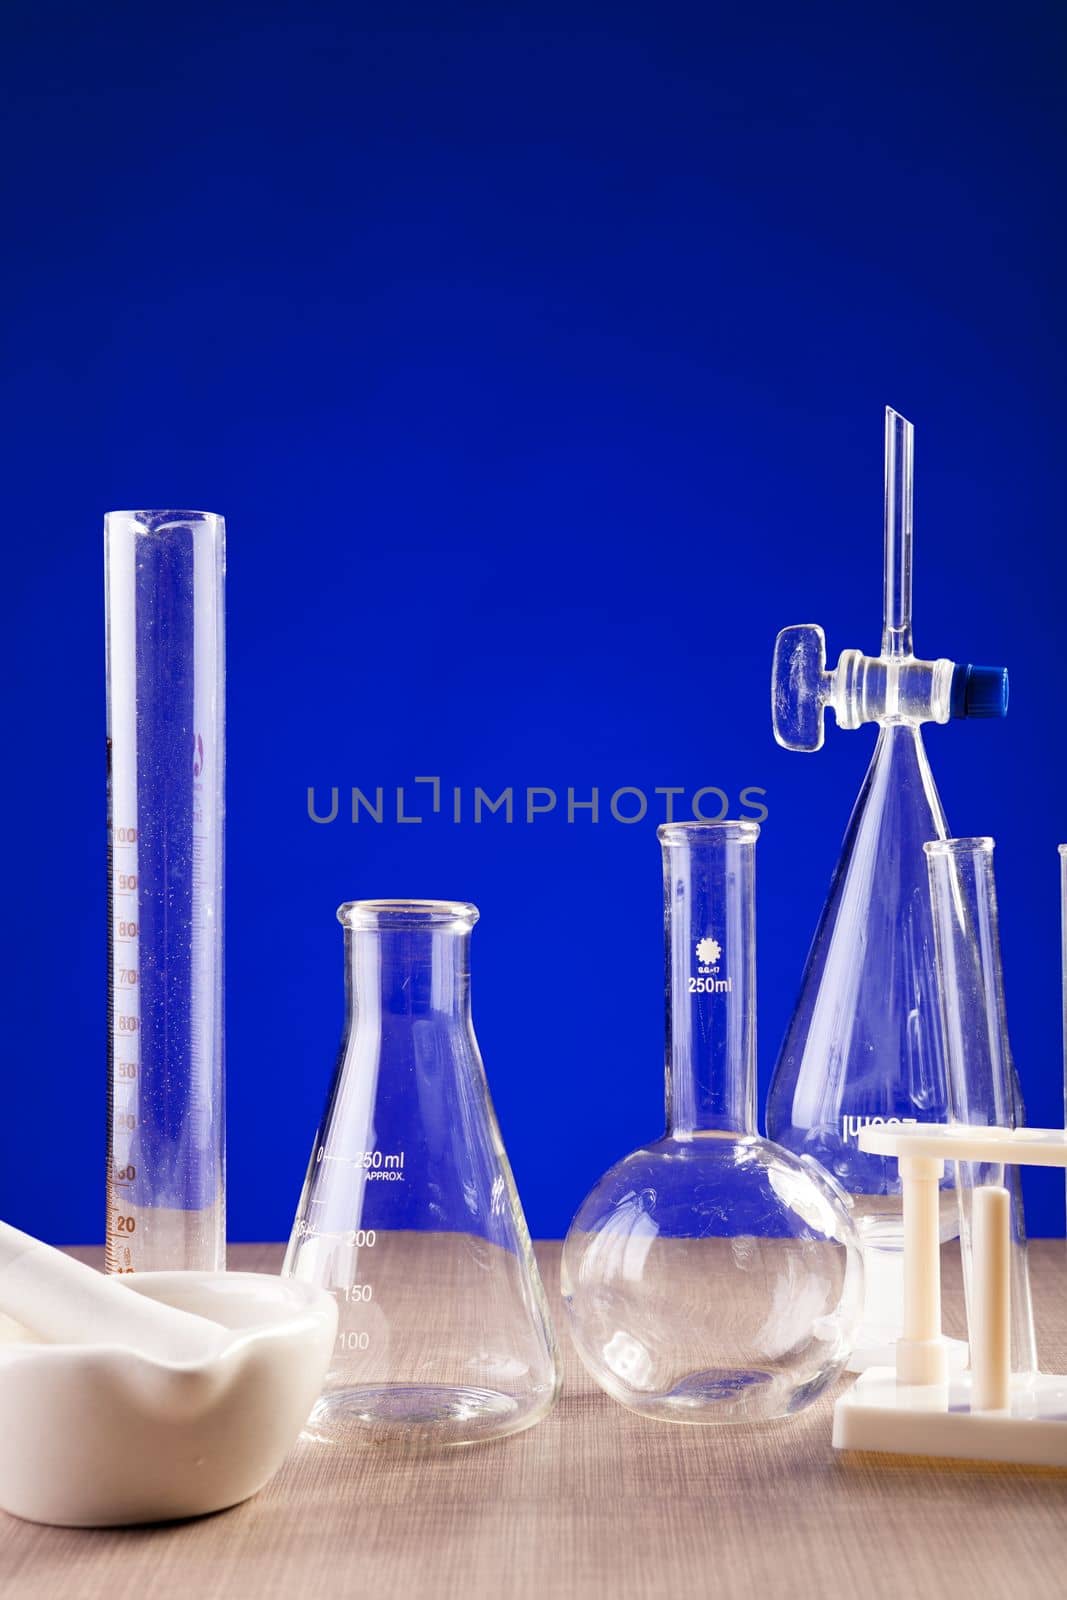 Chemistry lab set on table over blue background by DCStudio